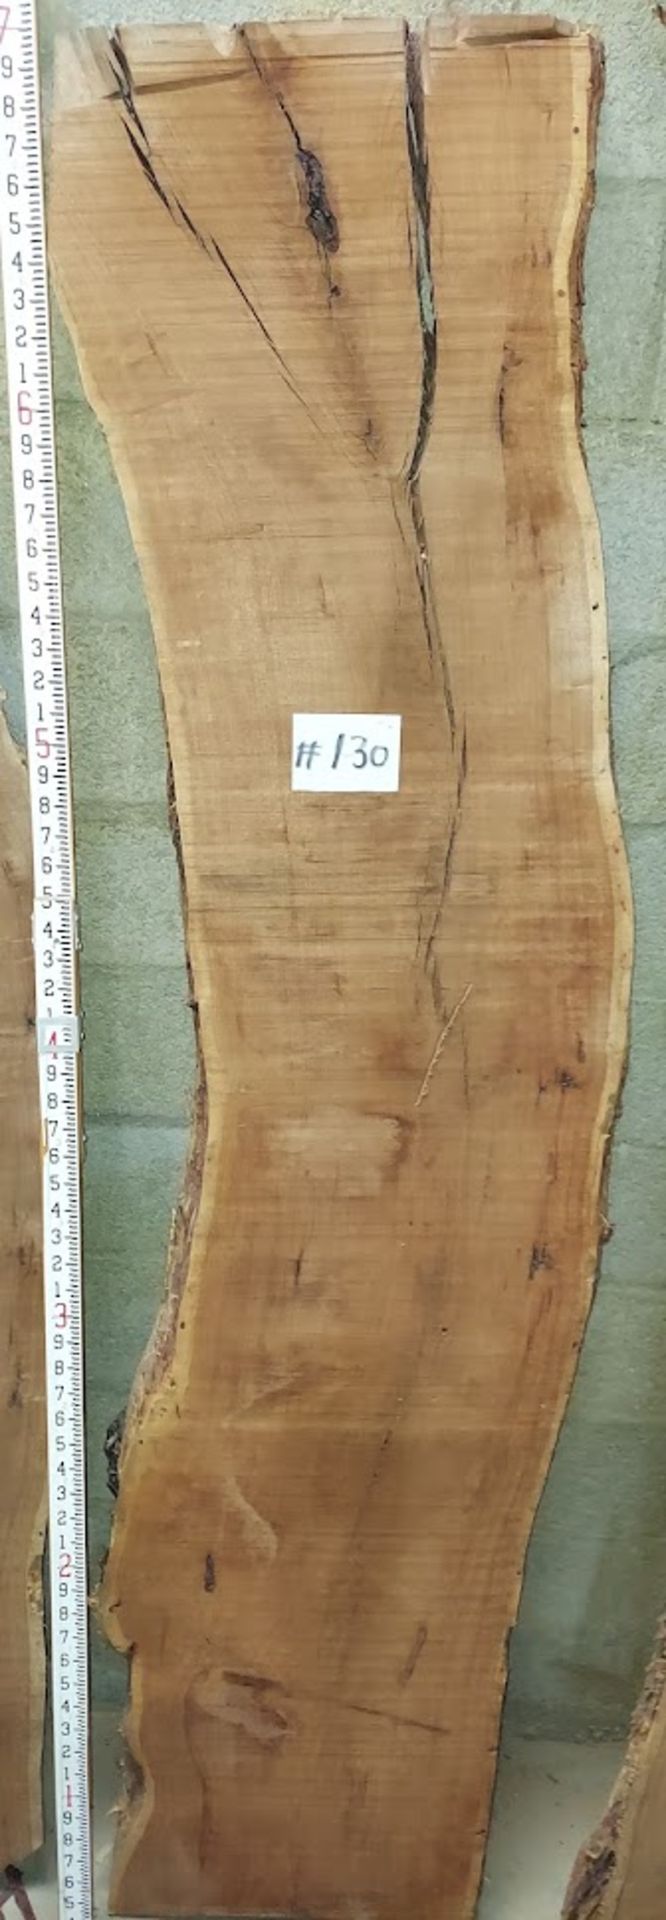 Mesquite Hardwood Lumber Slab, Size is approx. 84" x 18"- 19" x 2-1/4" Thick (Book Matched 128 &